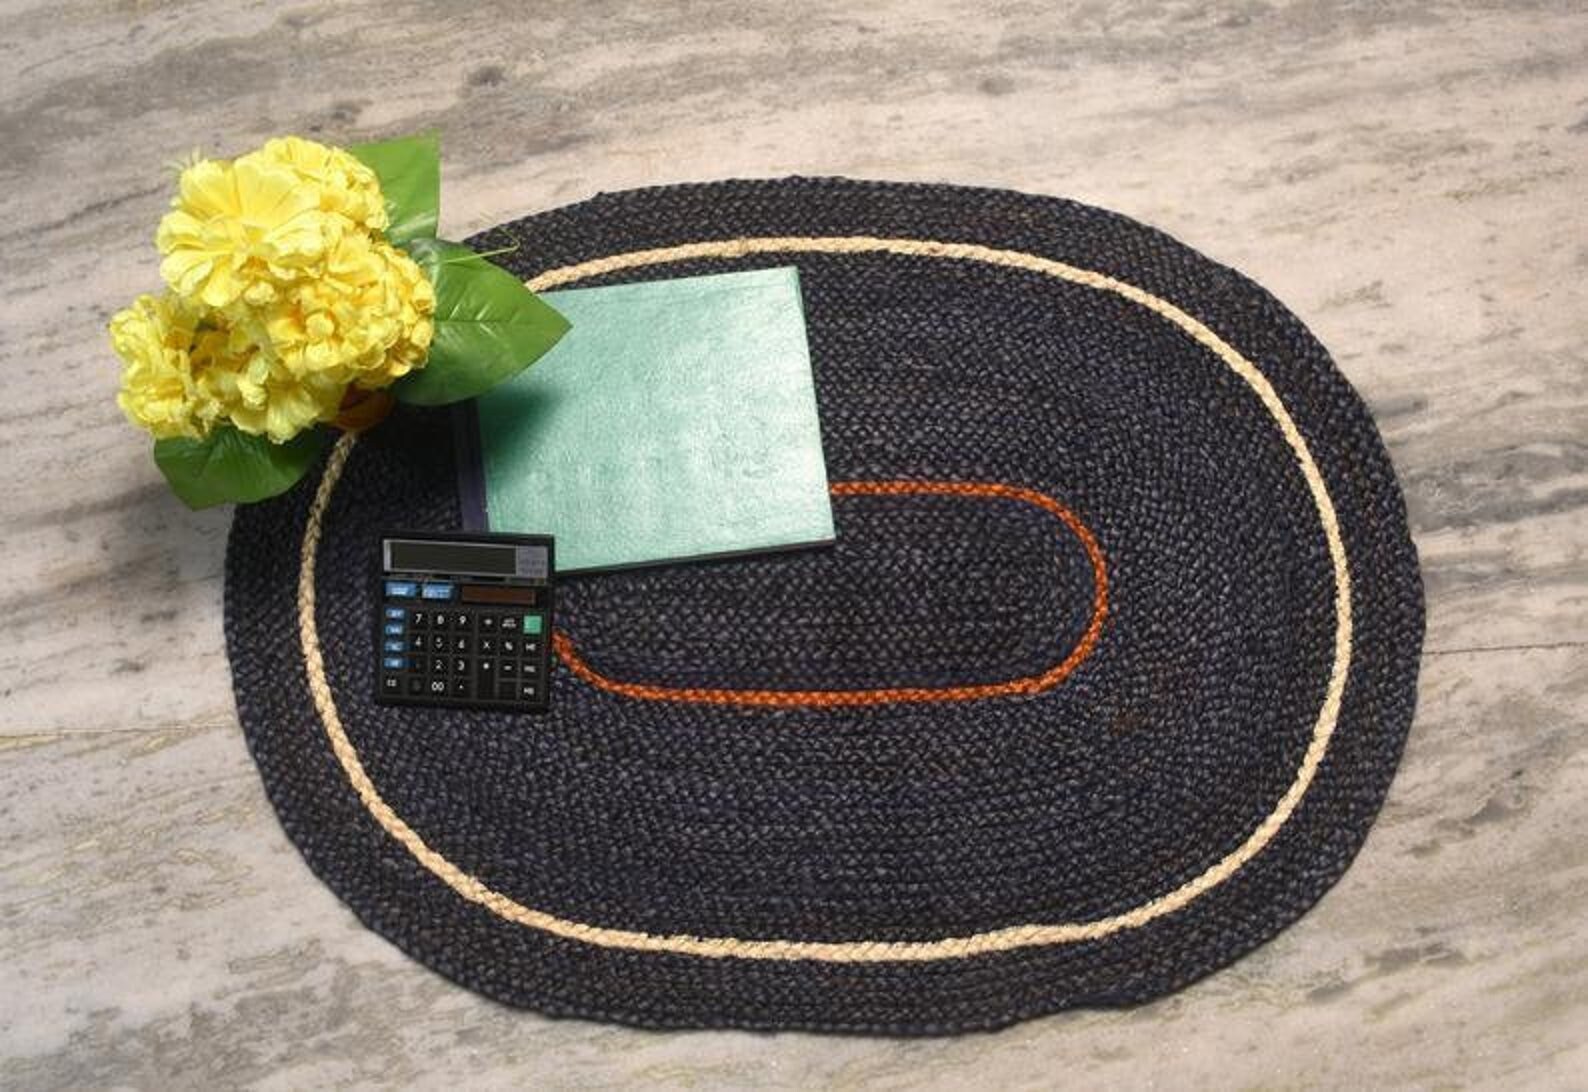 Black Outdoor Braided Oval Rugs –